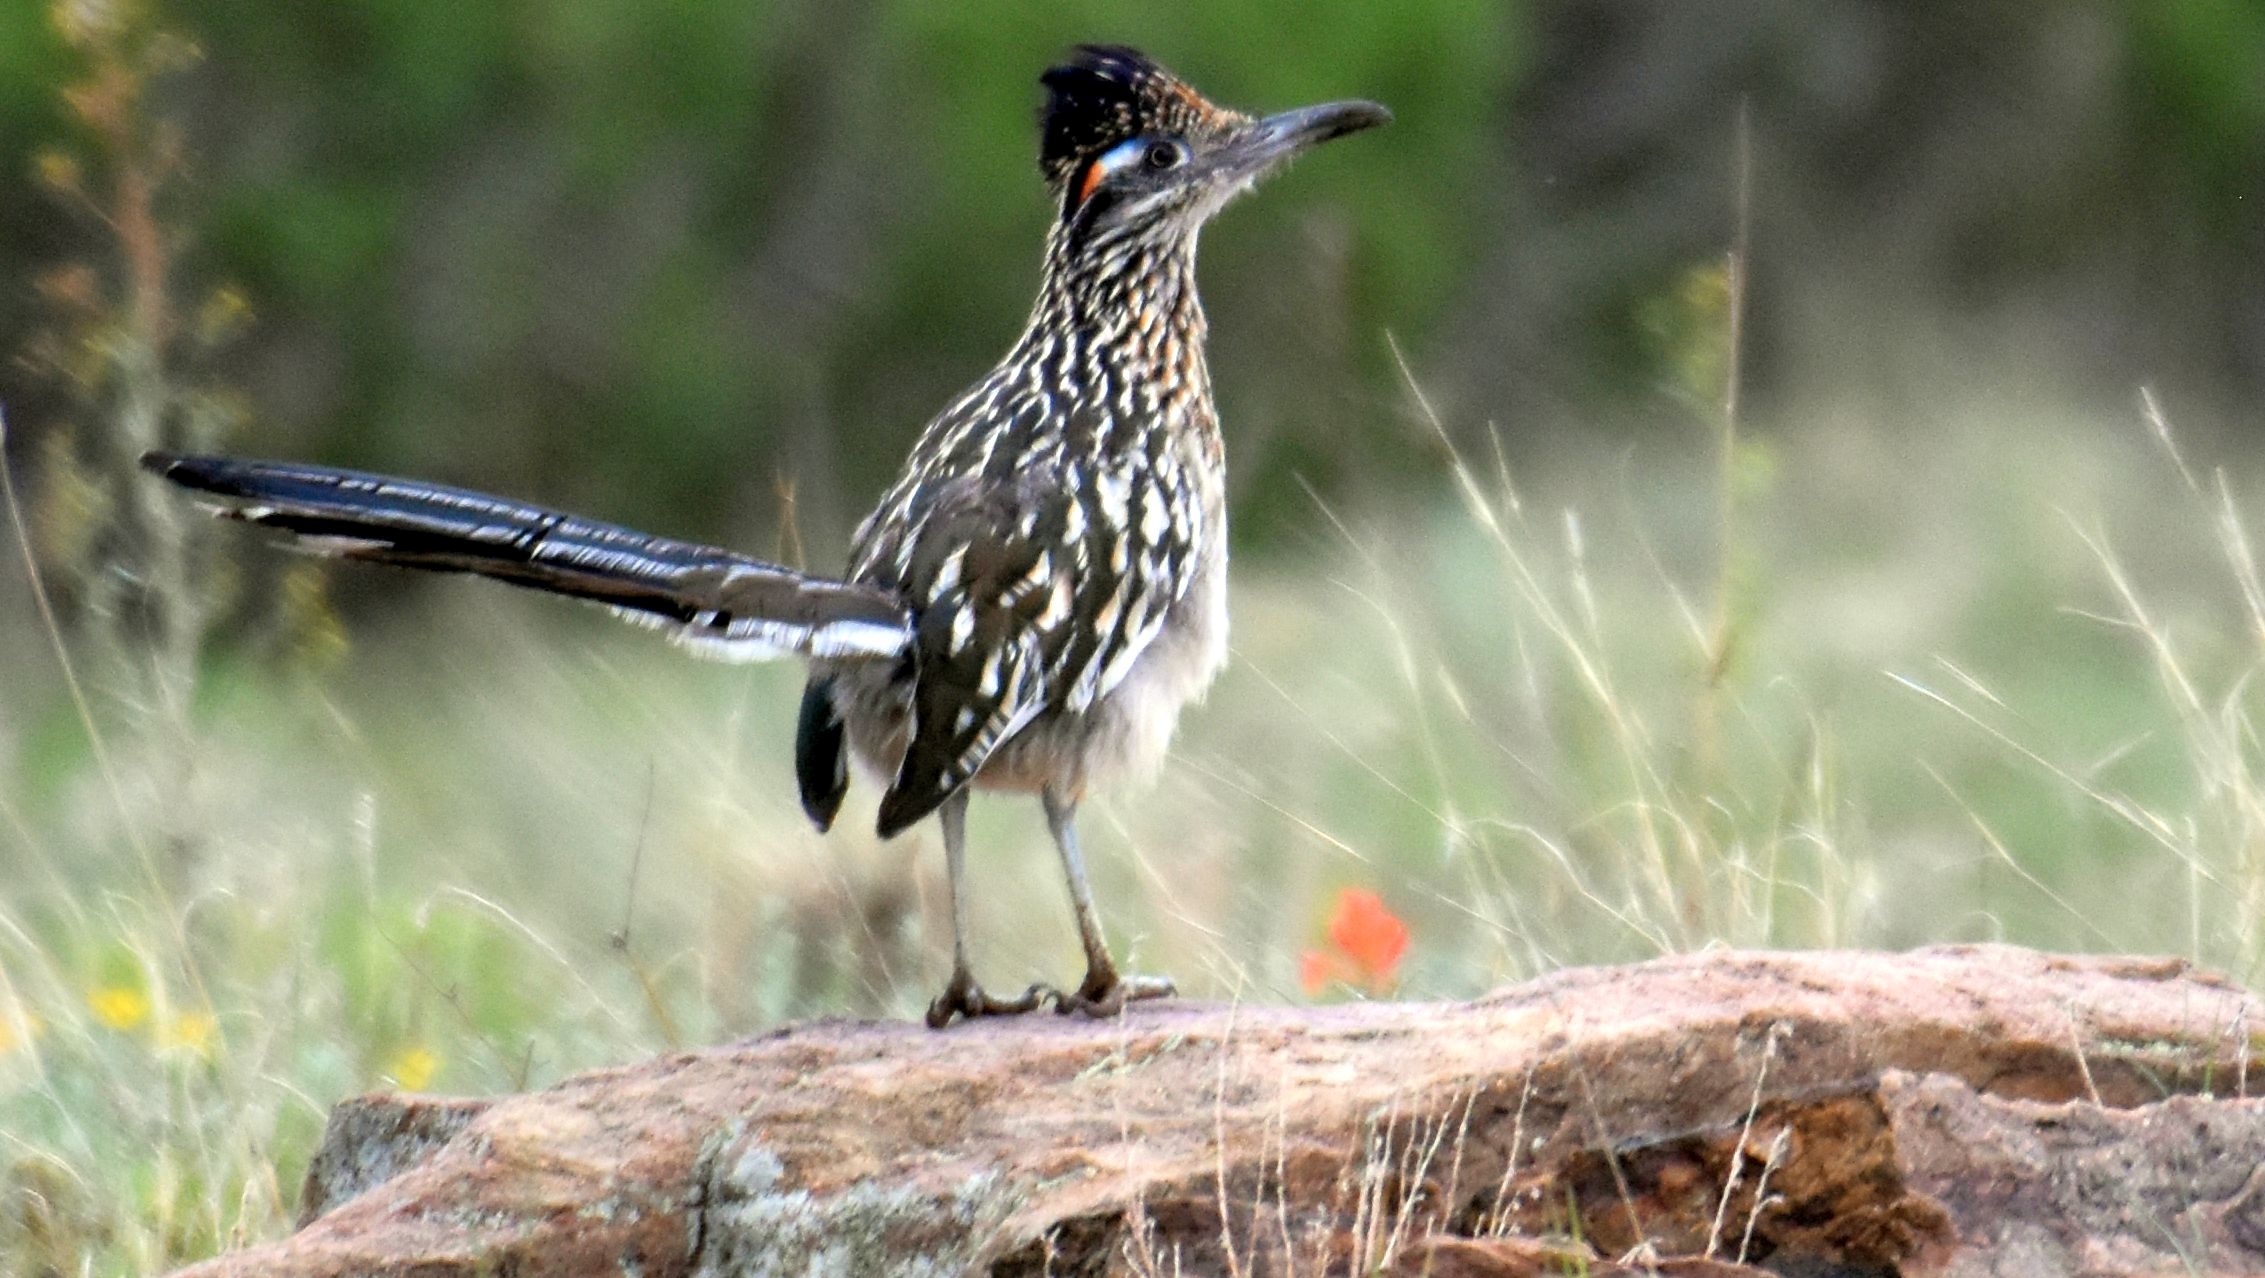 A medium-size bird with black and white feathers and a long tail standing on a rock in a field